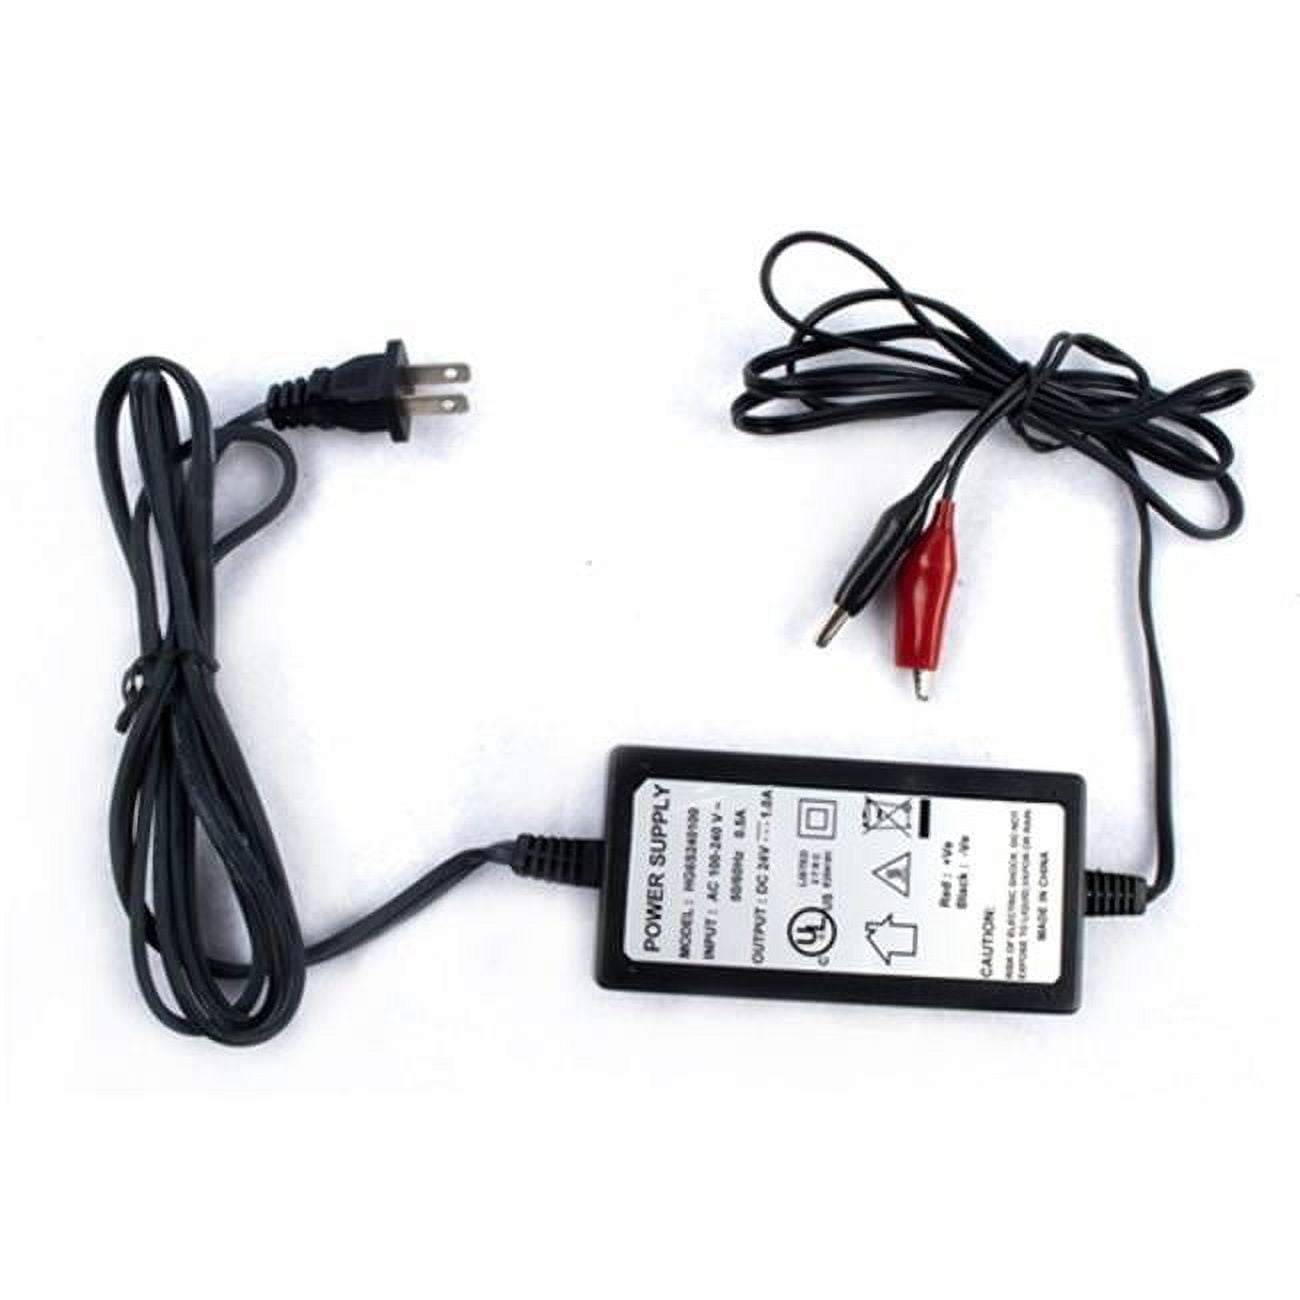 Picture of Aleko LM135-UNB LM135 24V Adapter Battery Charger for Gate Opener